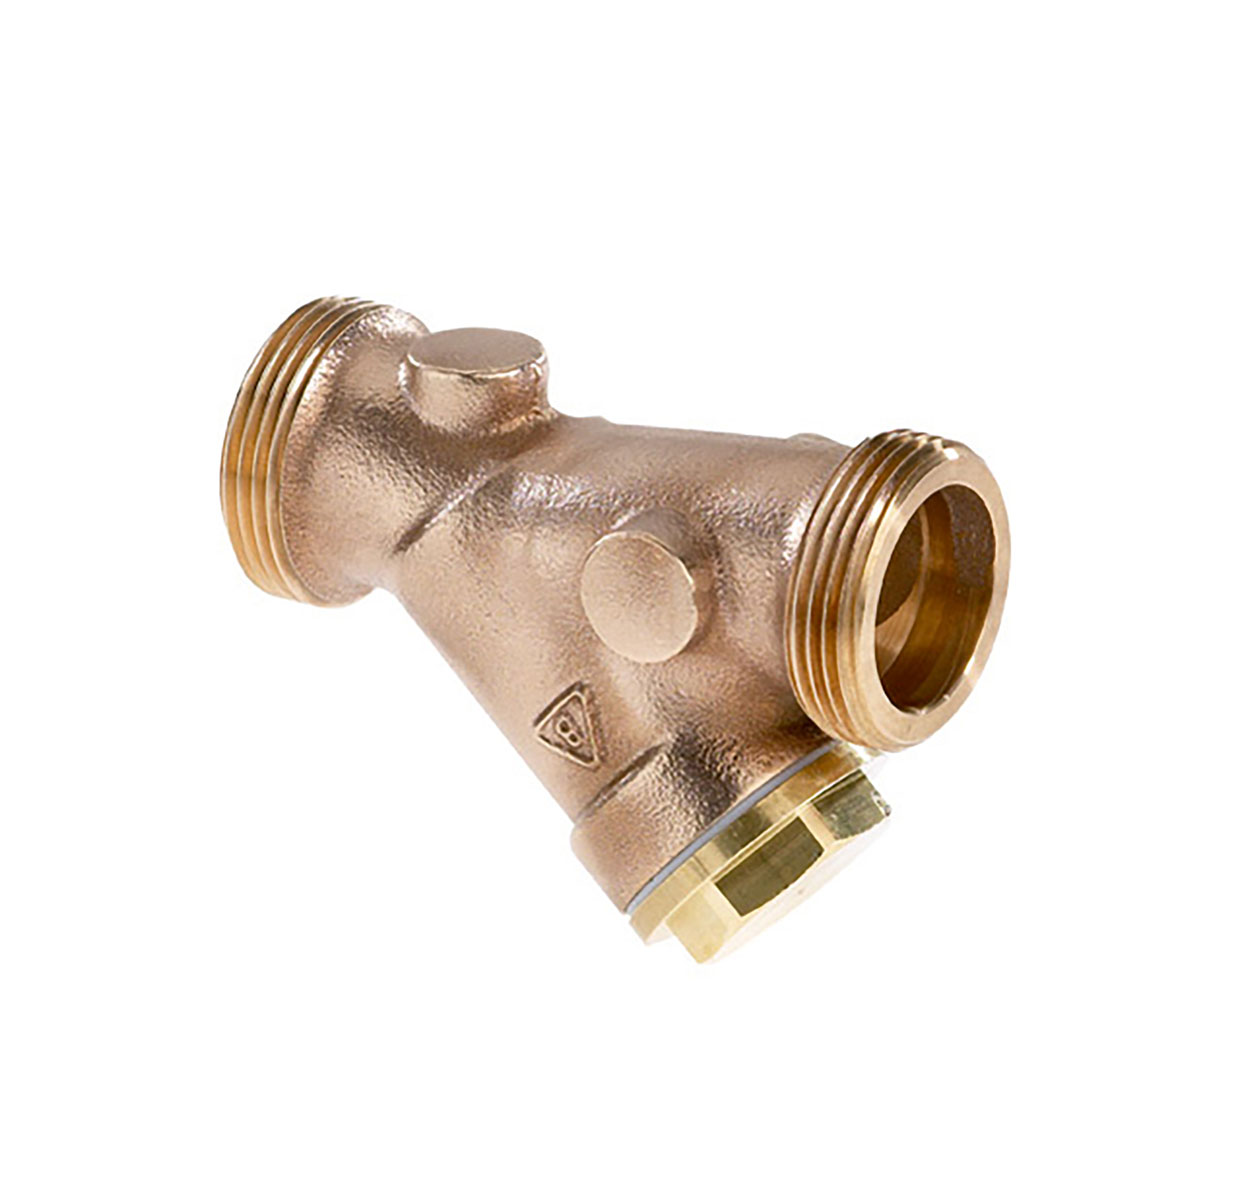 2452400 - Red-brass Strainer Strainer with PTFE-sealing (Teflon)